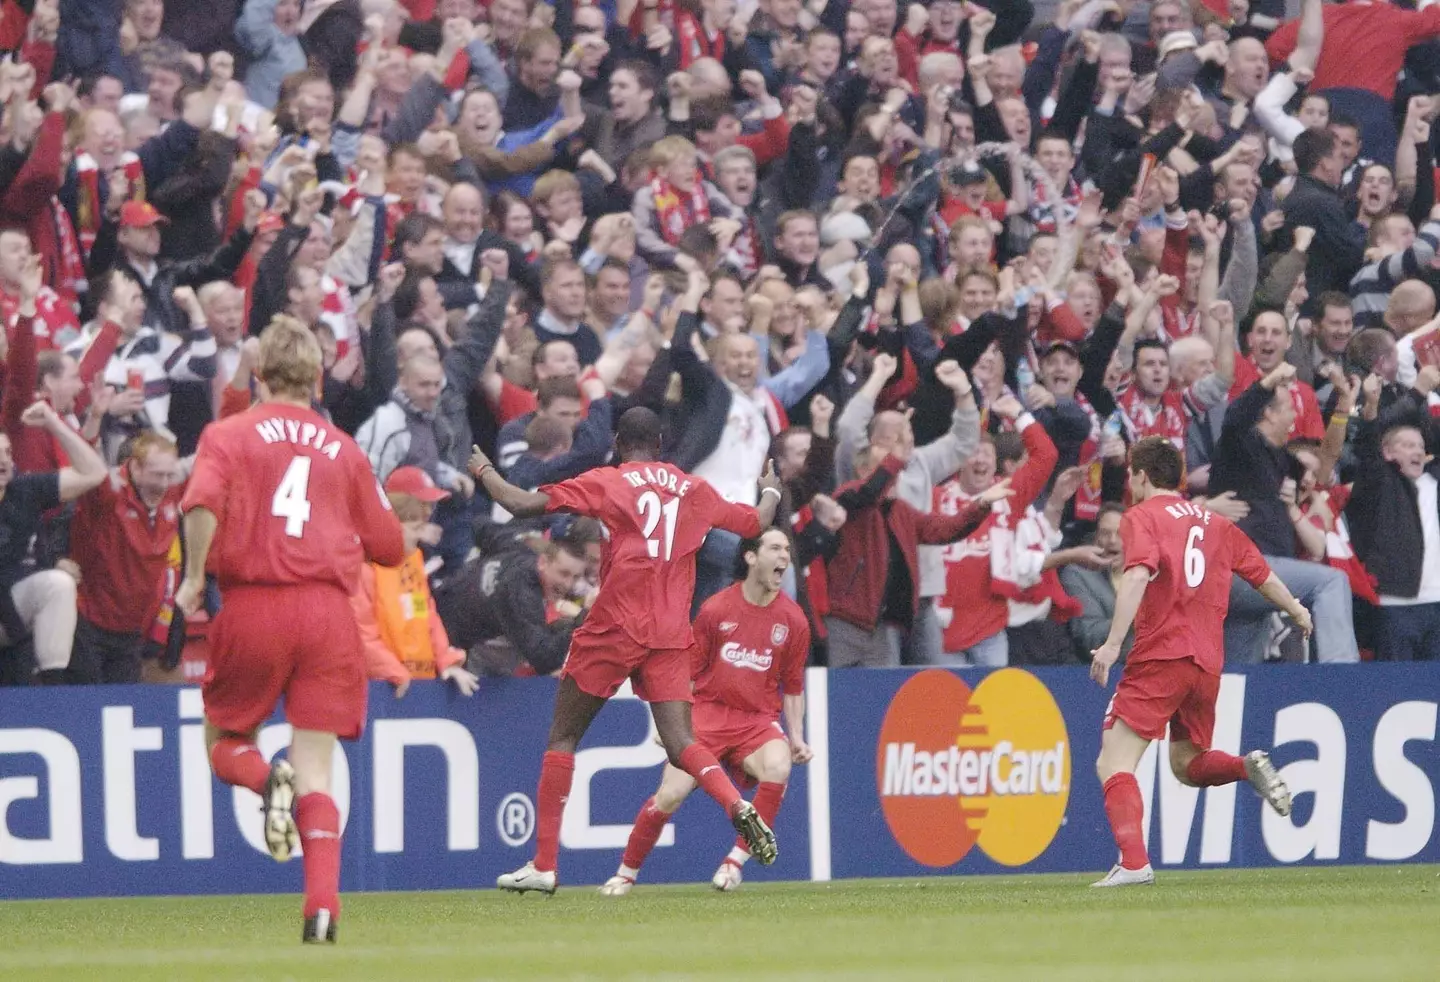 Liverpool would beat Chelsea in the Champions League semi-finals later that season (Image: PA)